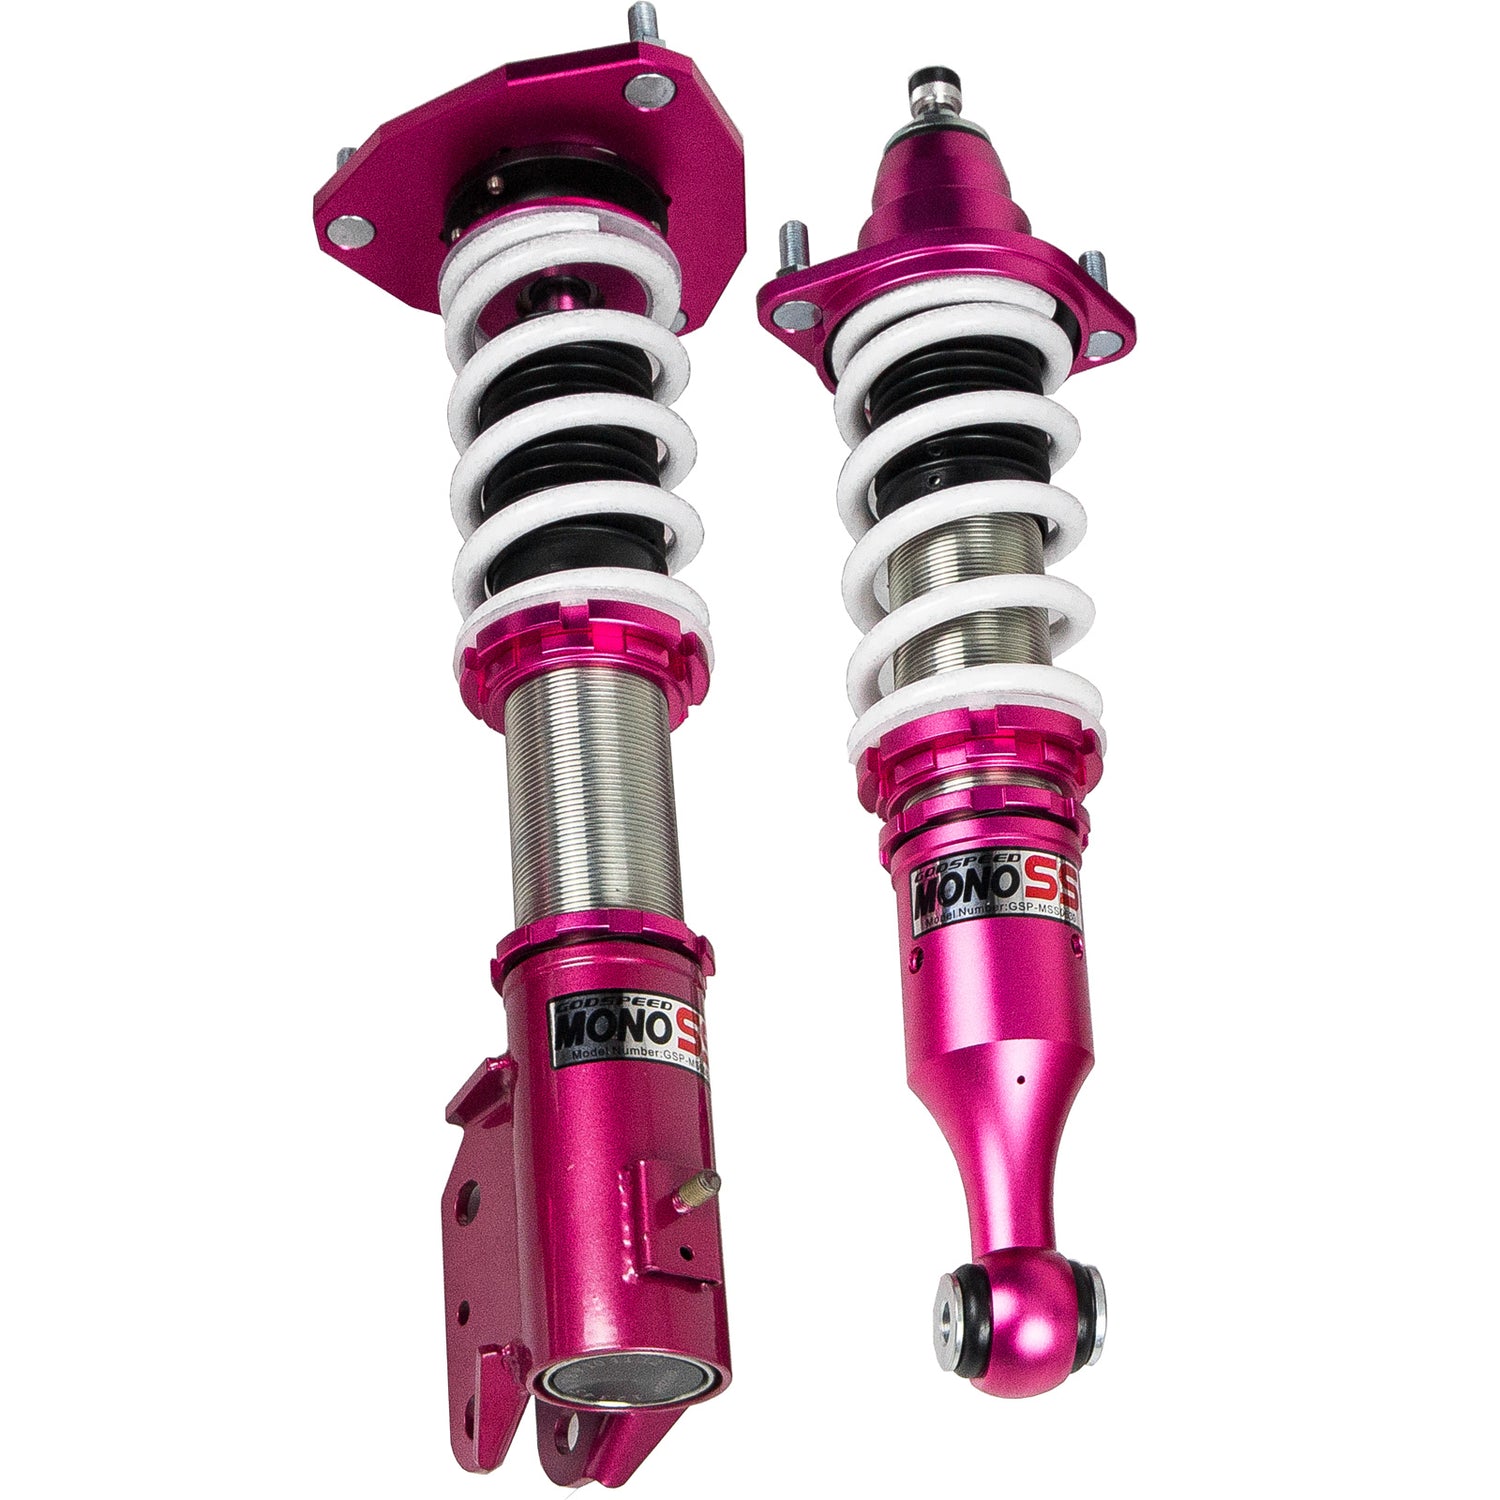 Godspeed MSS0630 MonoSS Coilover Lowering Kit, Fully Adjustable, Ride Height, Spring Tension And 16 Click Damping, Mitsubishi Lancer(CS6A/CS7A) 2002-06